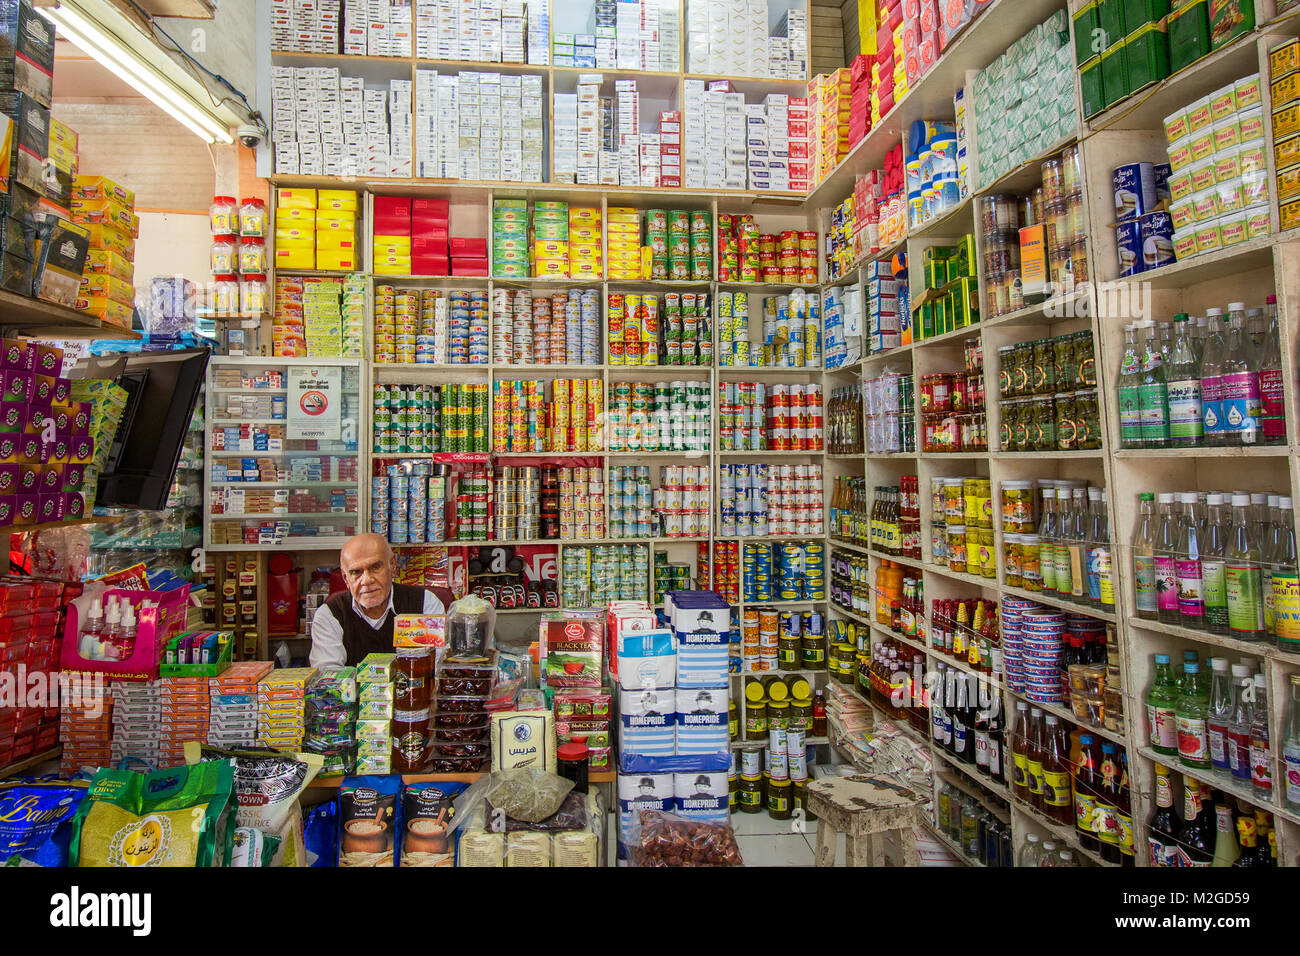 interior view of a grocery store in Bahrain, Middle East, with the store owner Stock Photo